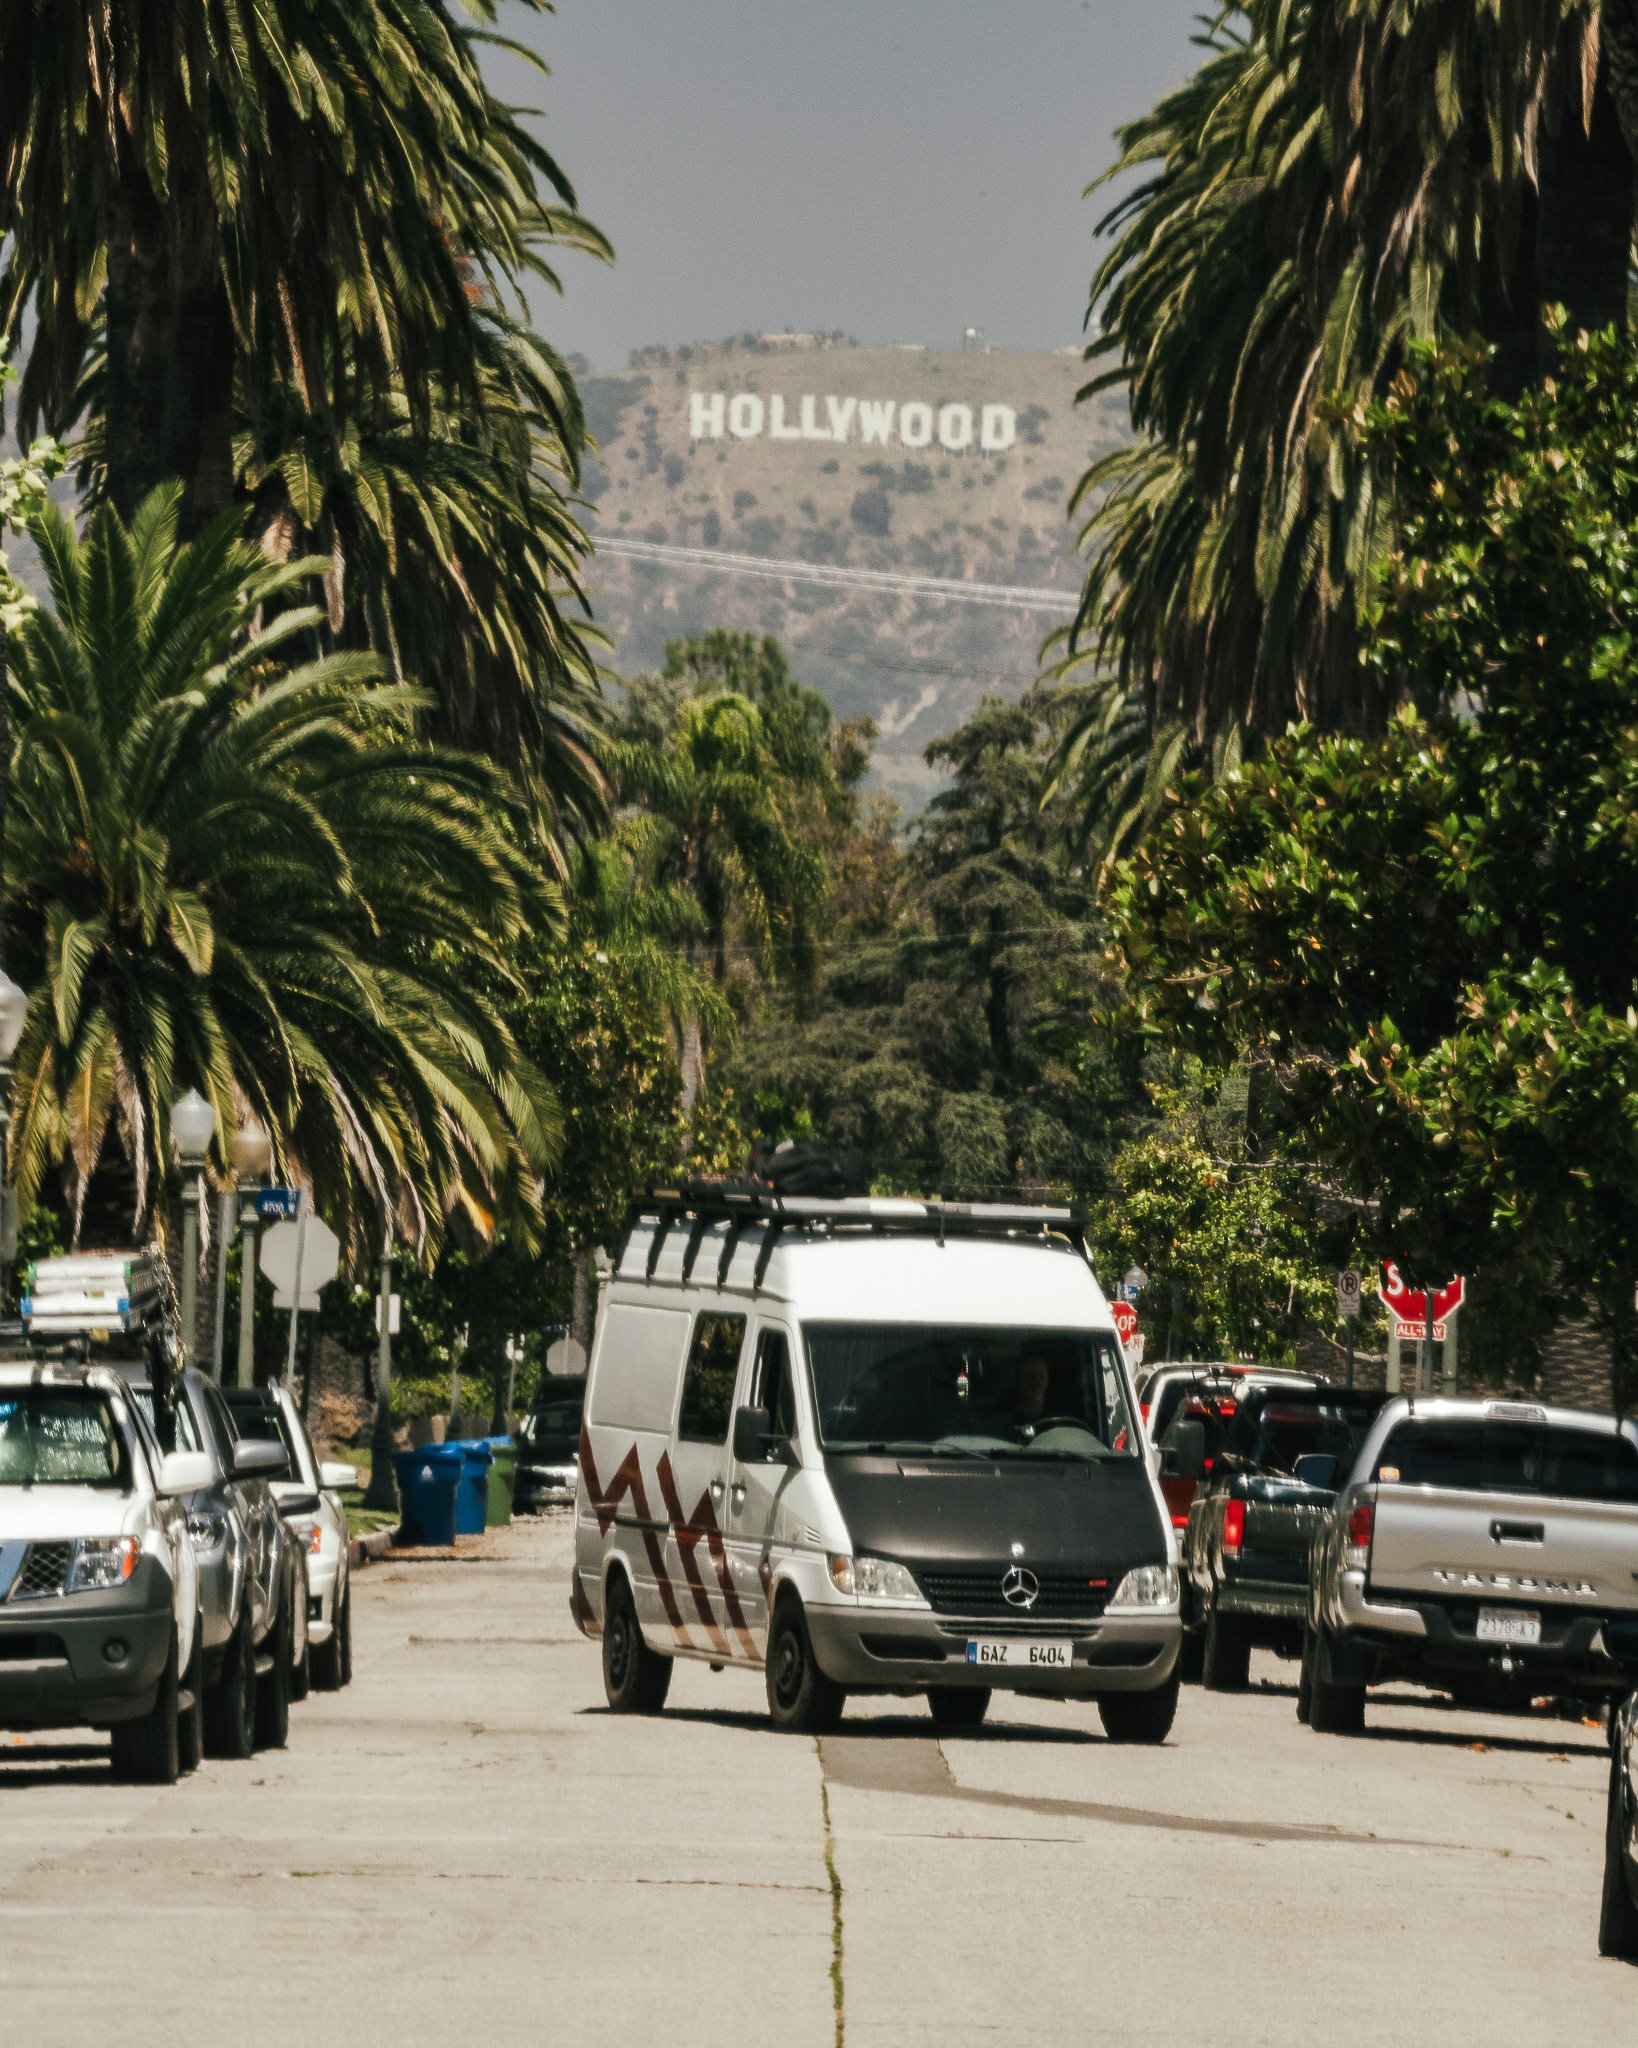 LOS ANGELES - EN | DE
Originale we didn't feel the urge to visit L.A.. We had visited the city on earlier travels and big cities are always a bit of a hustle with the van. But suddenly we found ourselves in this popular palm tree lined street with th